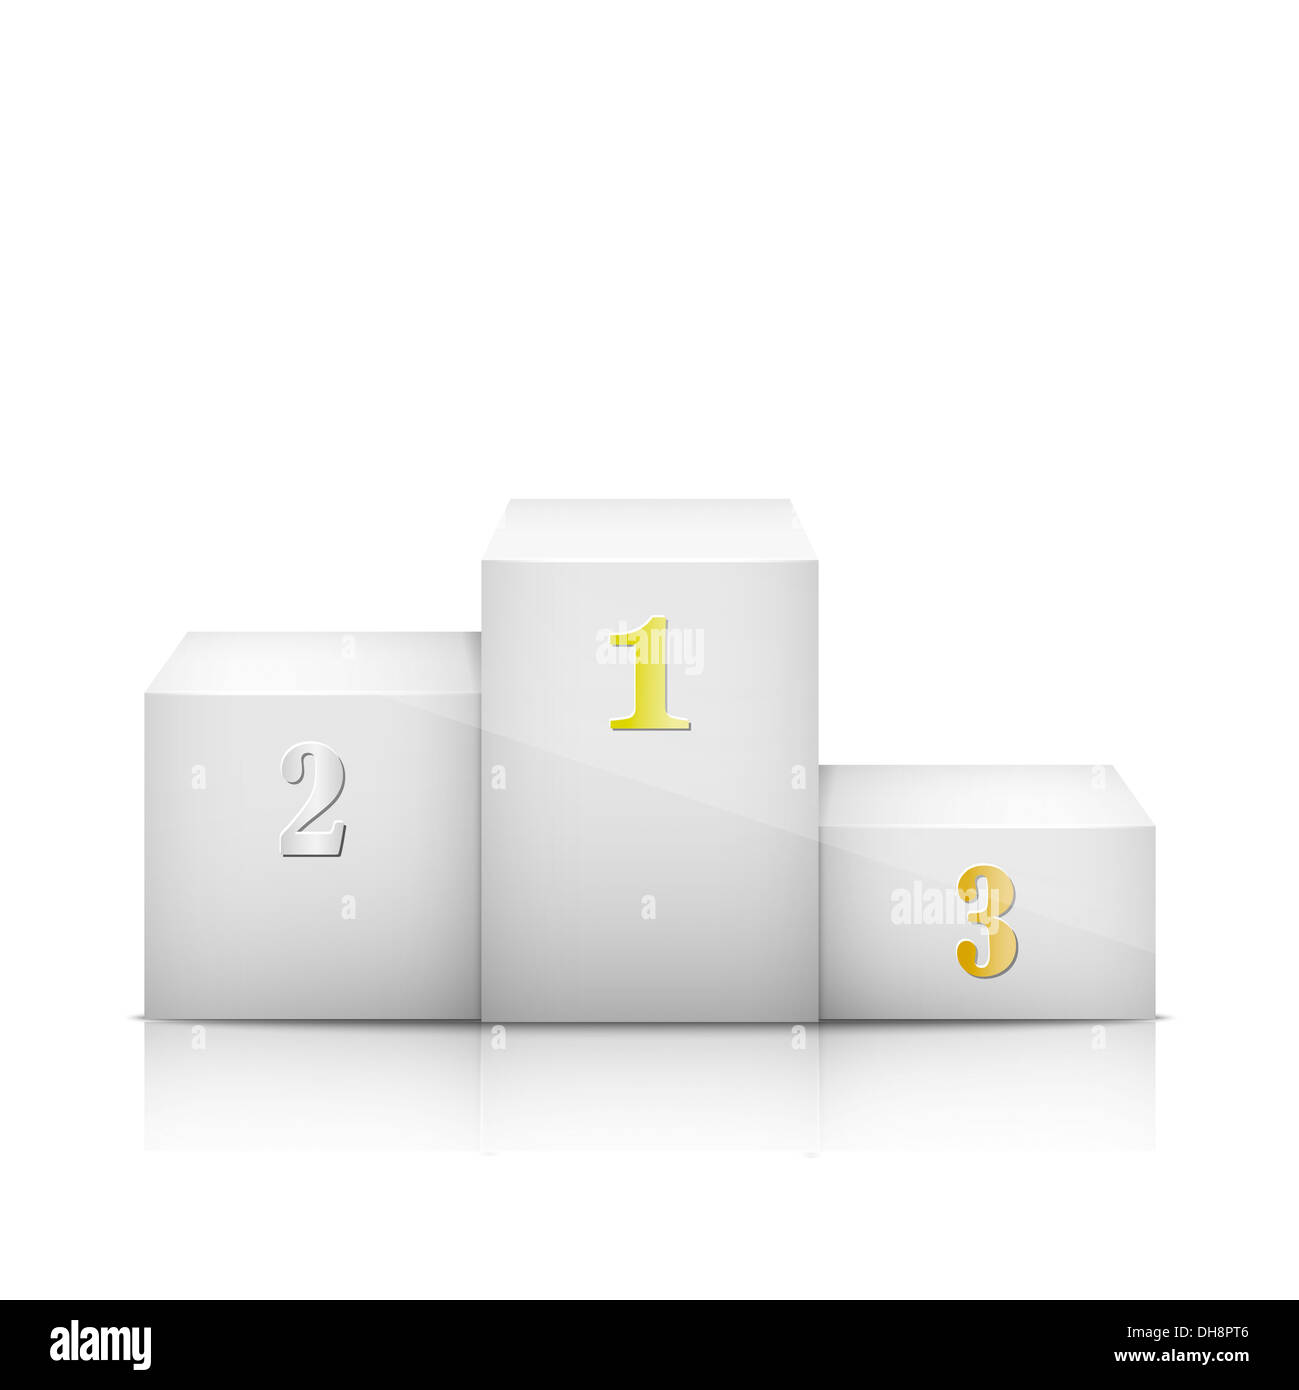 White Olympic Pedestal With Numbers Stock Photo